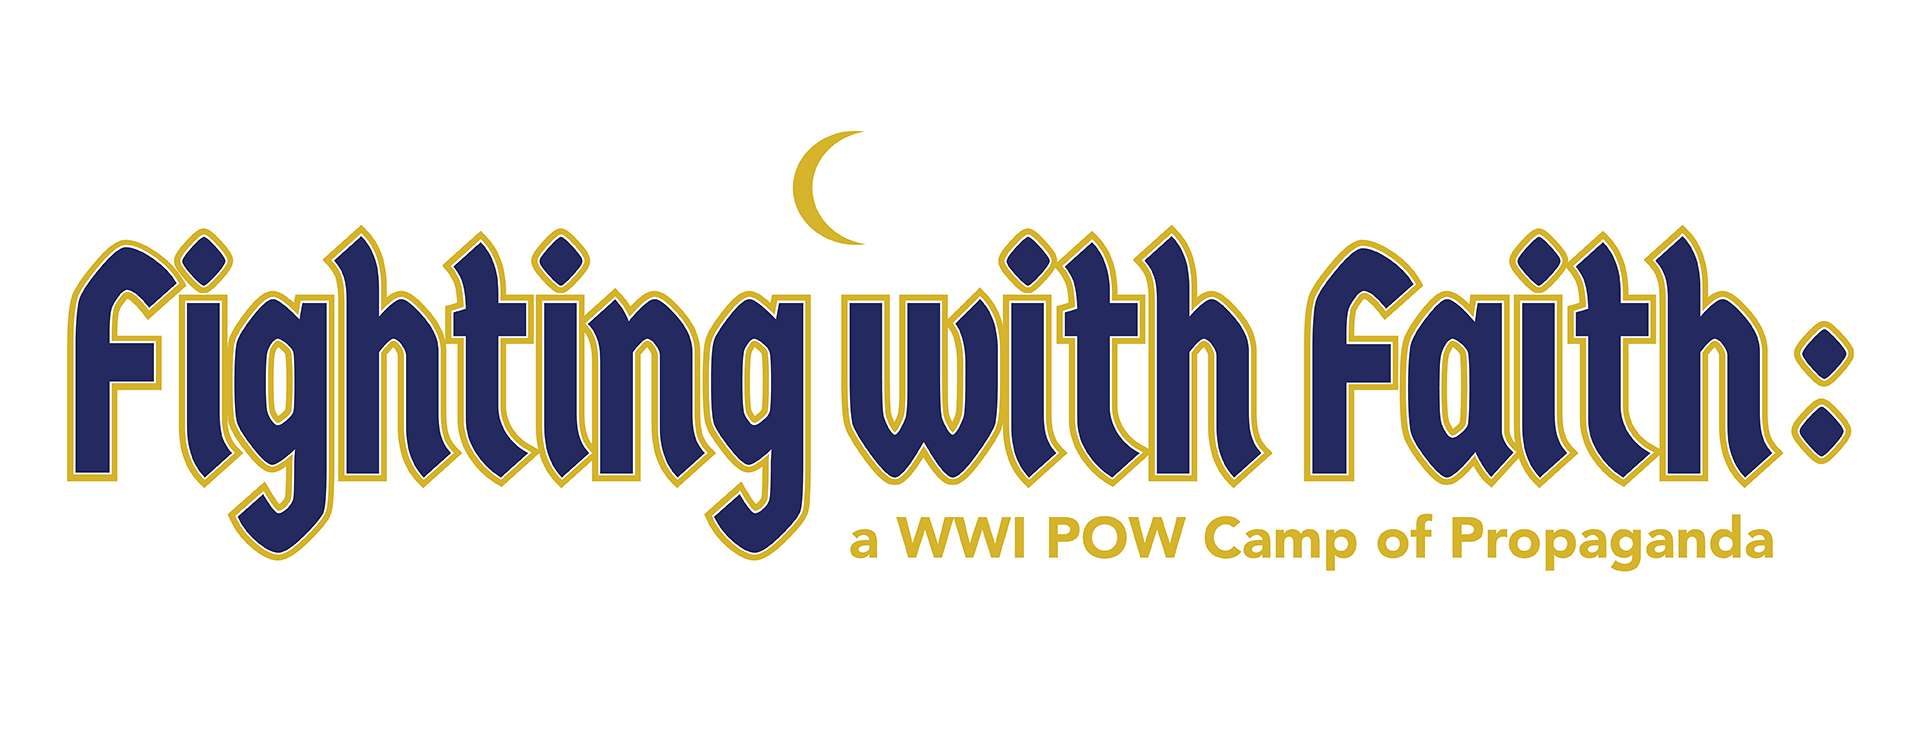 Text in dark blue and gold: Fighting with Faith: a WWI POW Camp of Propaganda